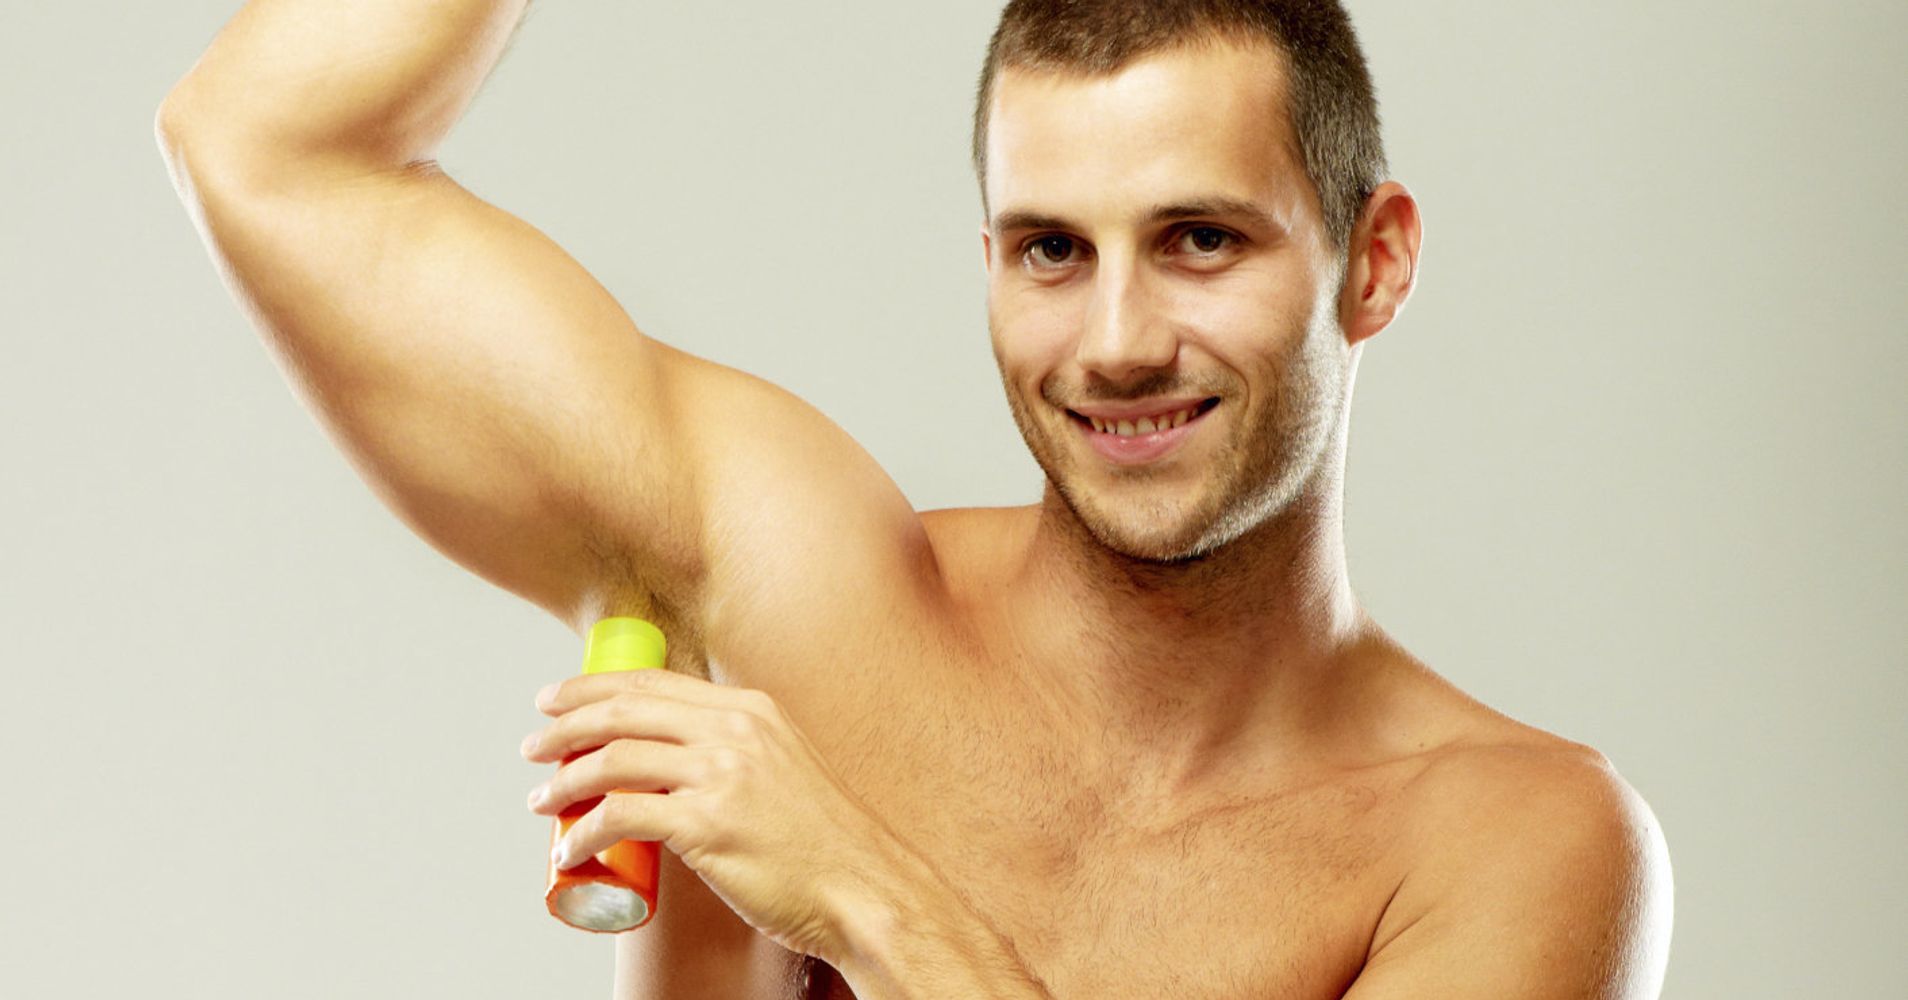 Heres The Best Way To Apply Deodorant According To A Scientist Huffpost 